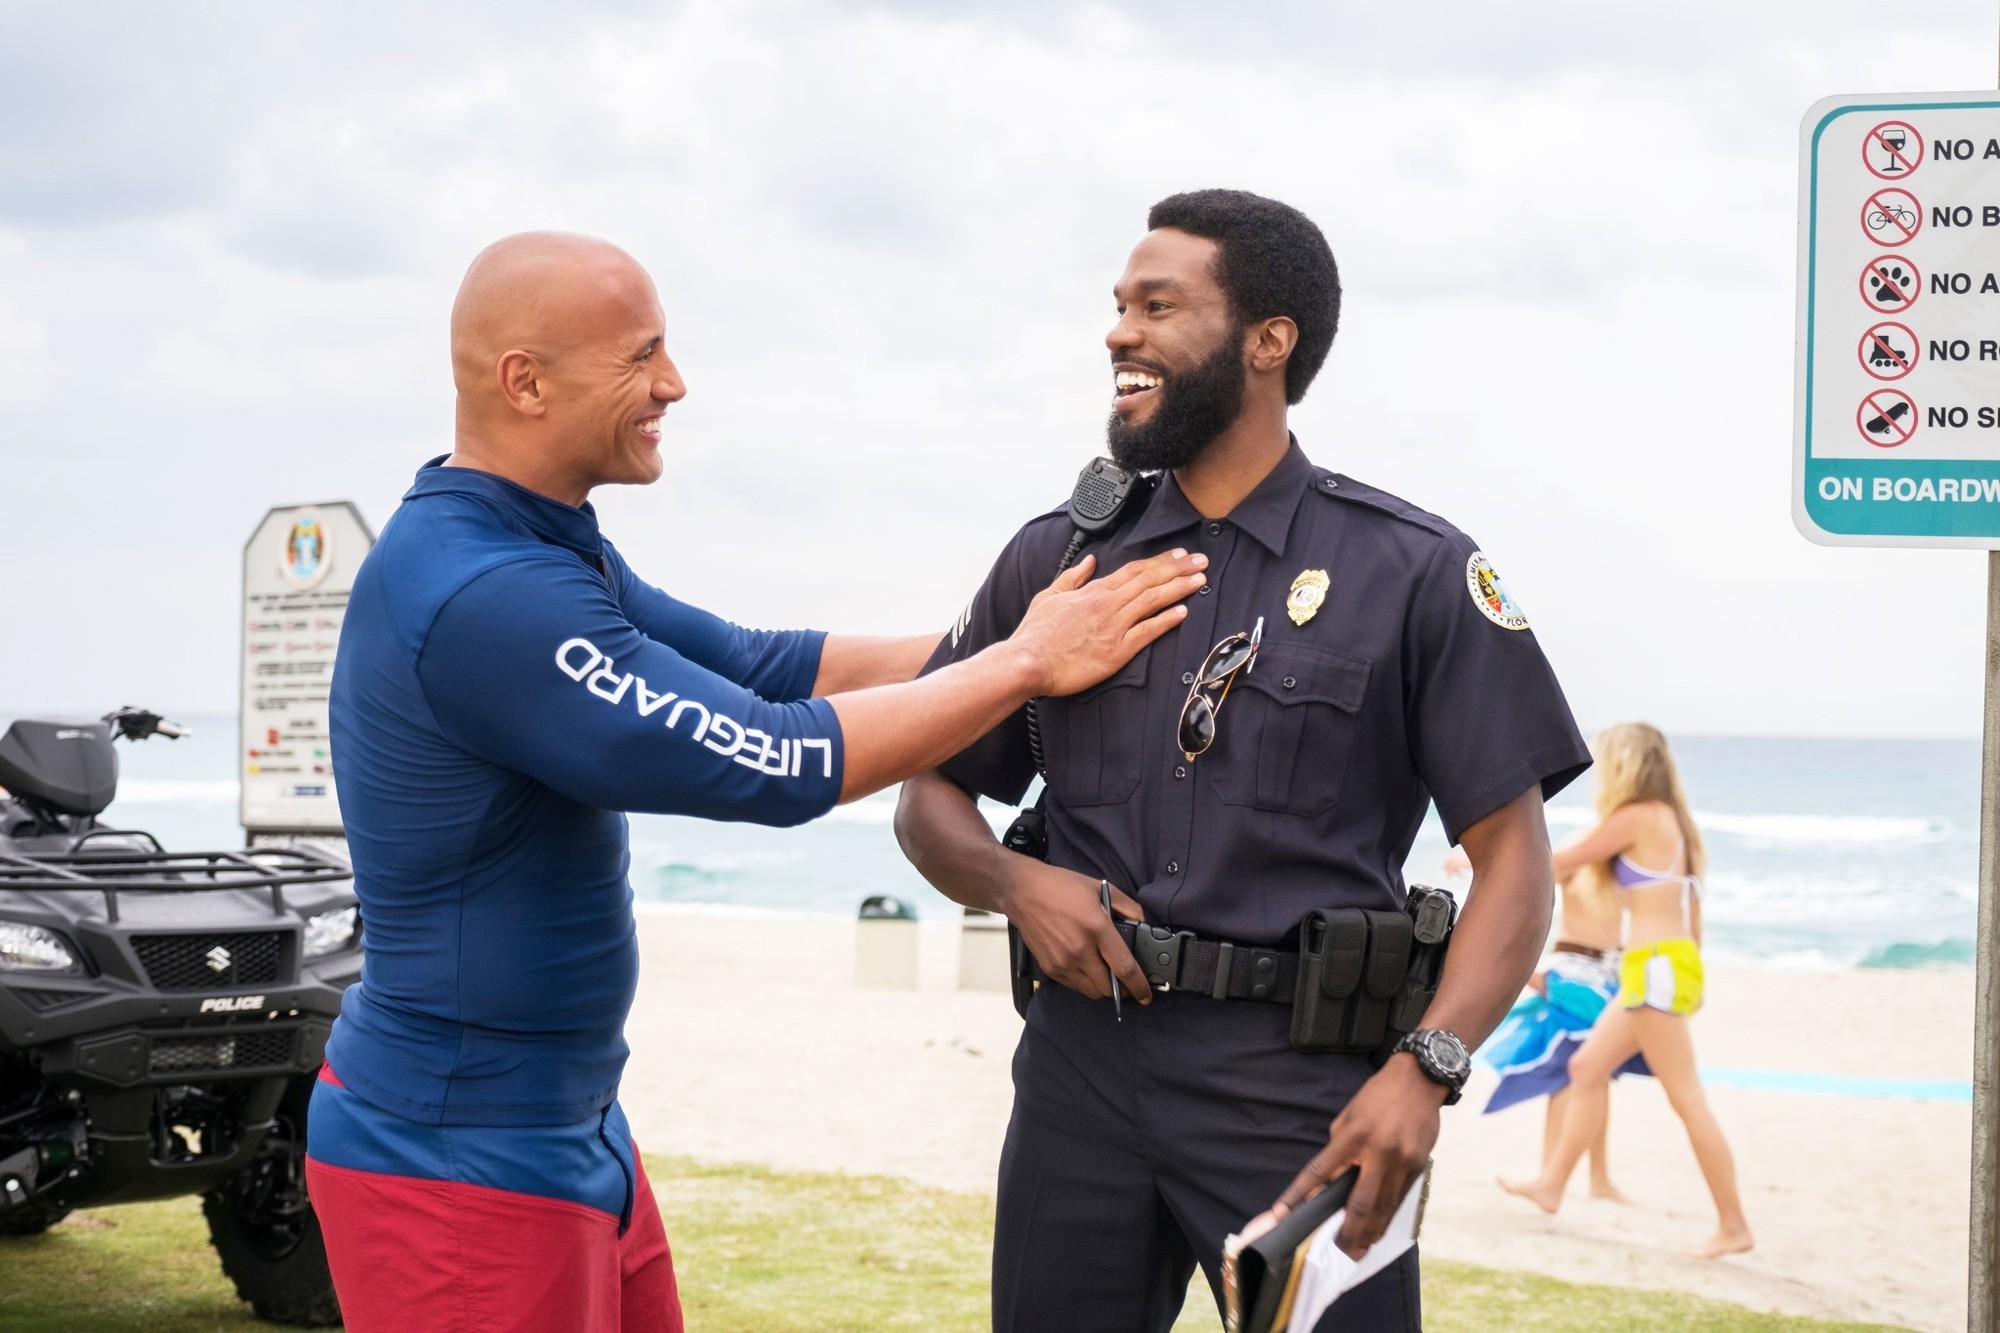 The Rock stars as Mitch Buchannon and Yahya Abdul-Mateen II stars as Sgt. Ellerbee in Paramount Pictures' Baywatch (2017)